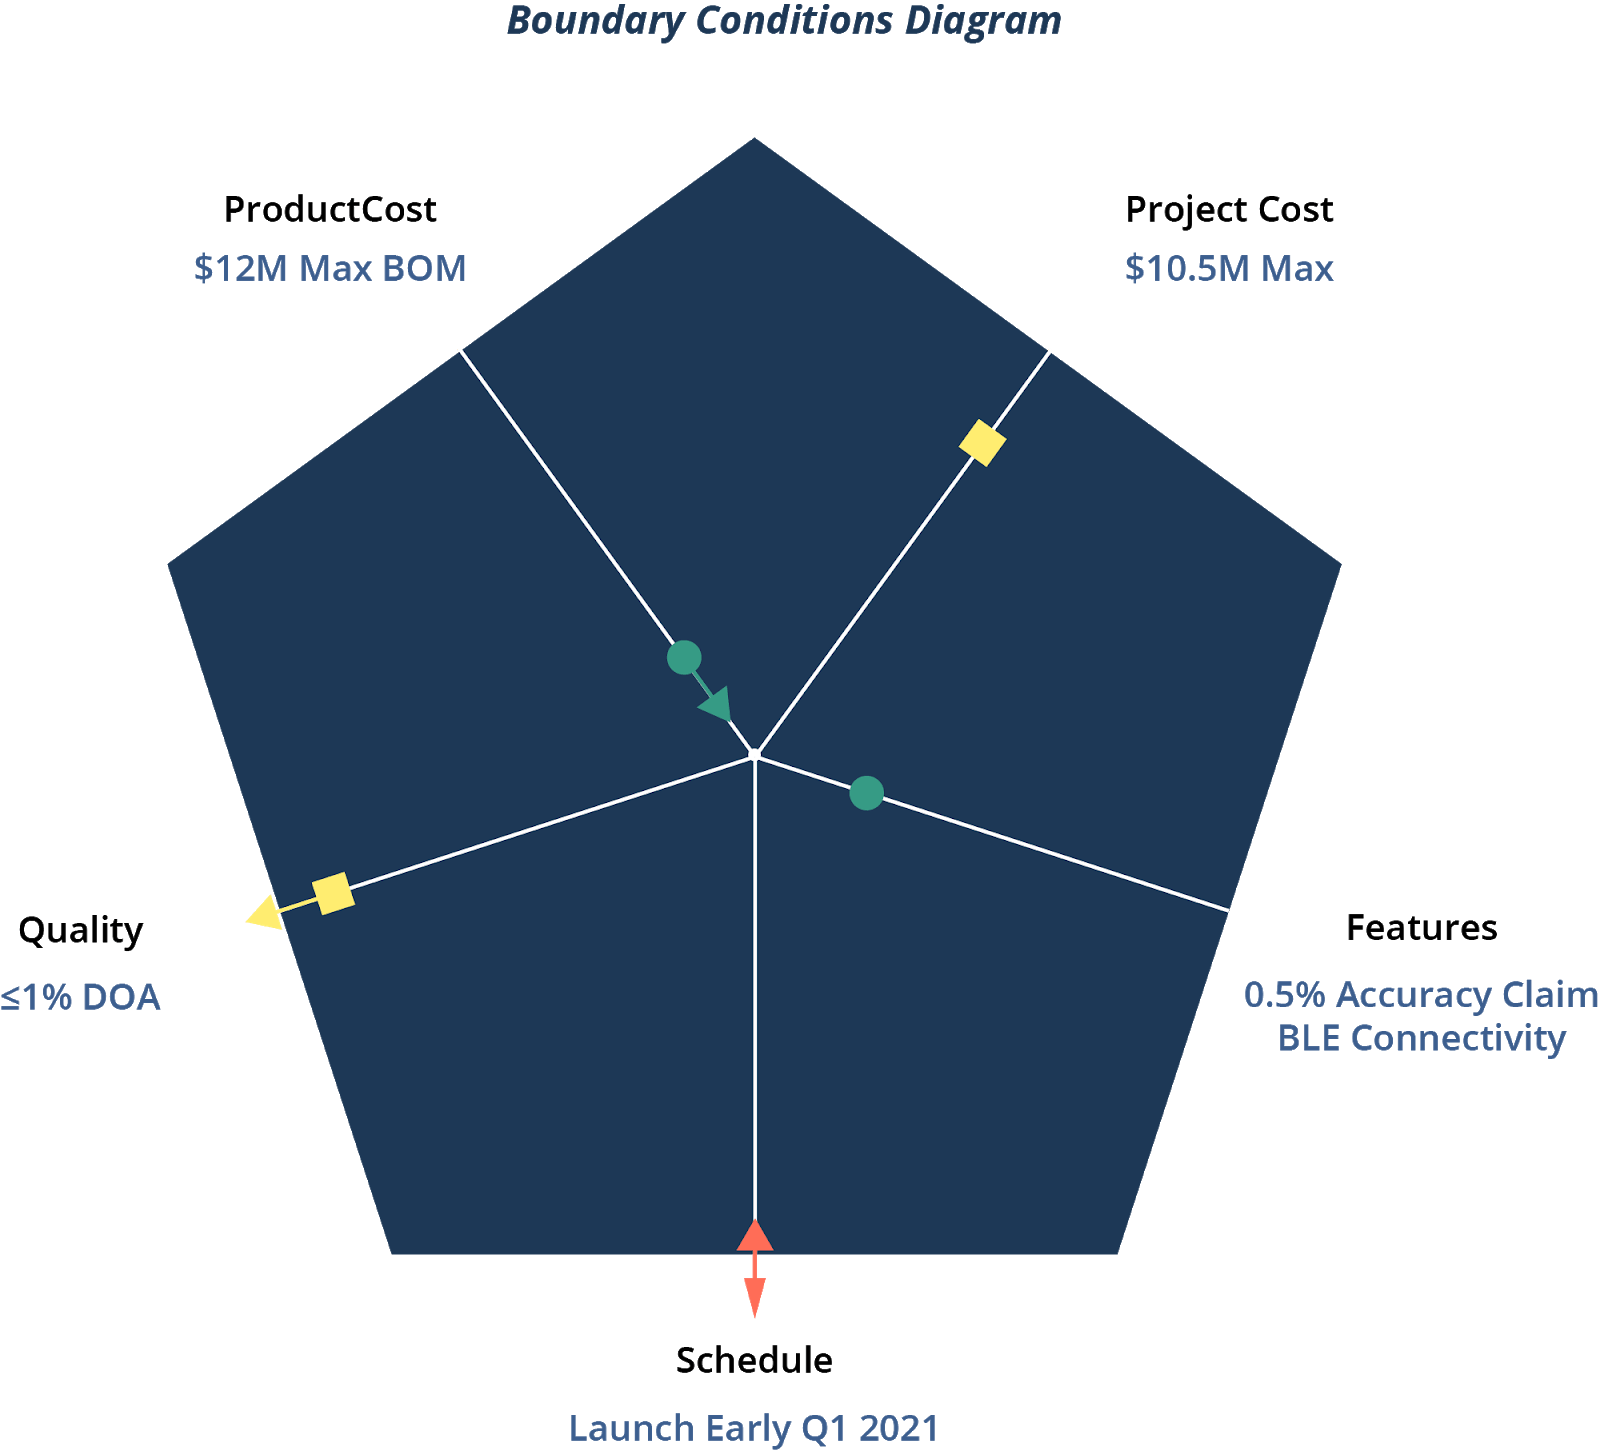 Software product development boundary conditions diagram